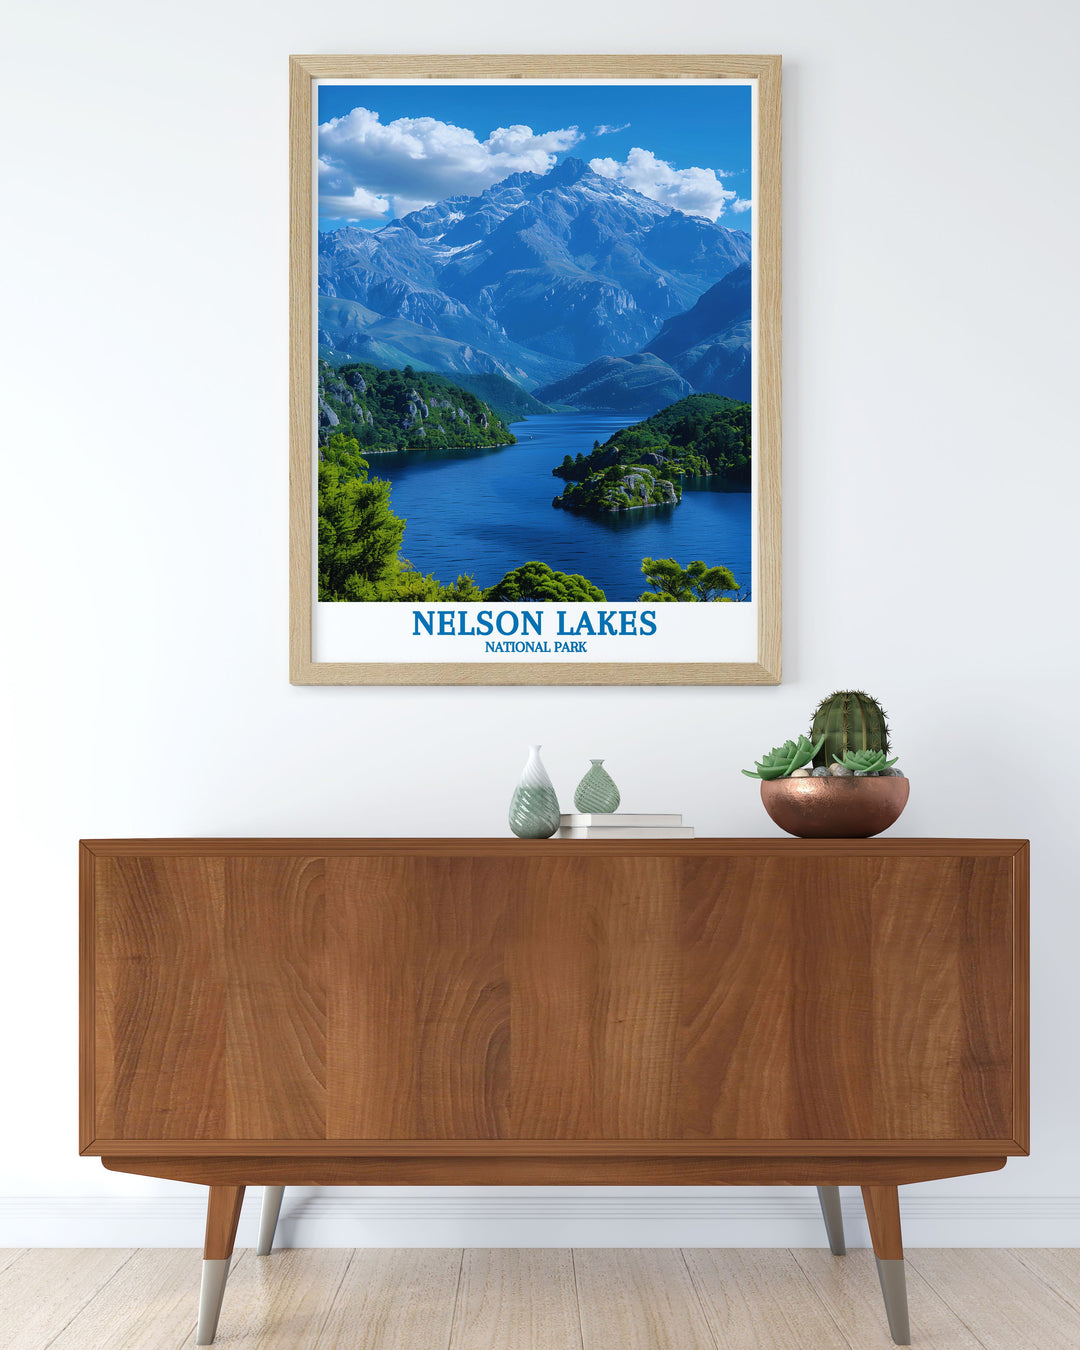 High quality Lake Rotoiti calm waters and scenic views vintage print showcasing the timeless beauty of this New Zealand location crafted with attention to detail and vibrant colors to enhance your home decor with natural elegance.